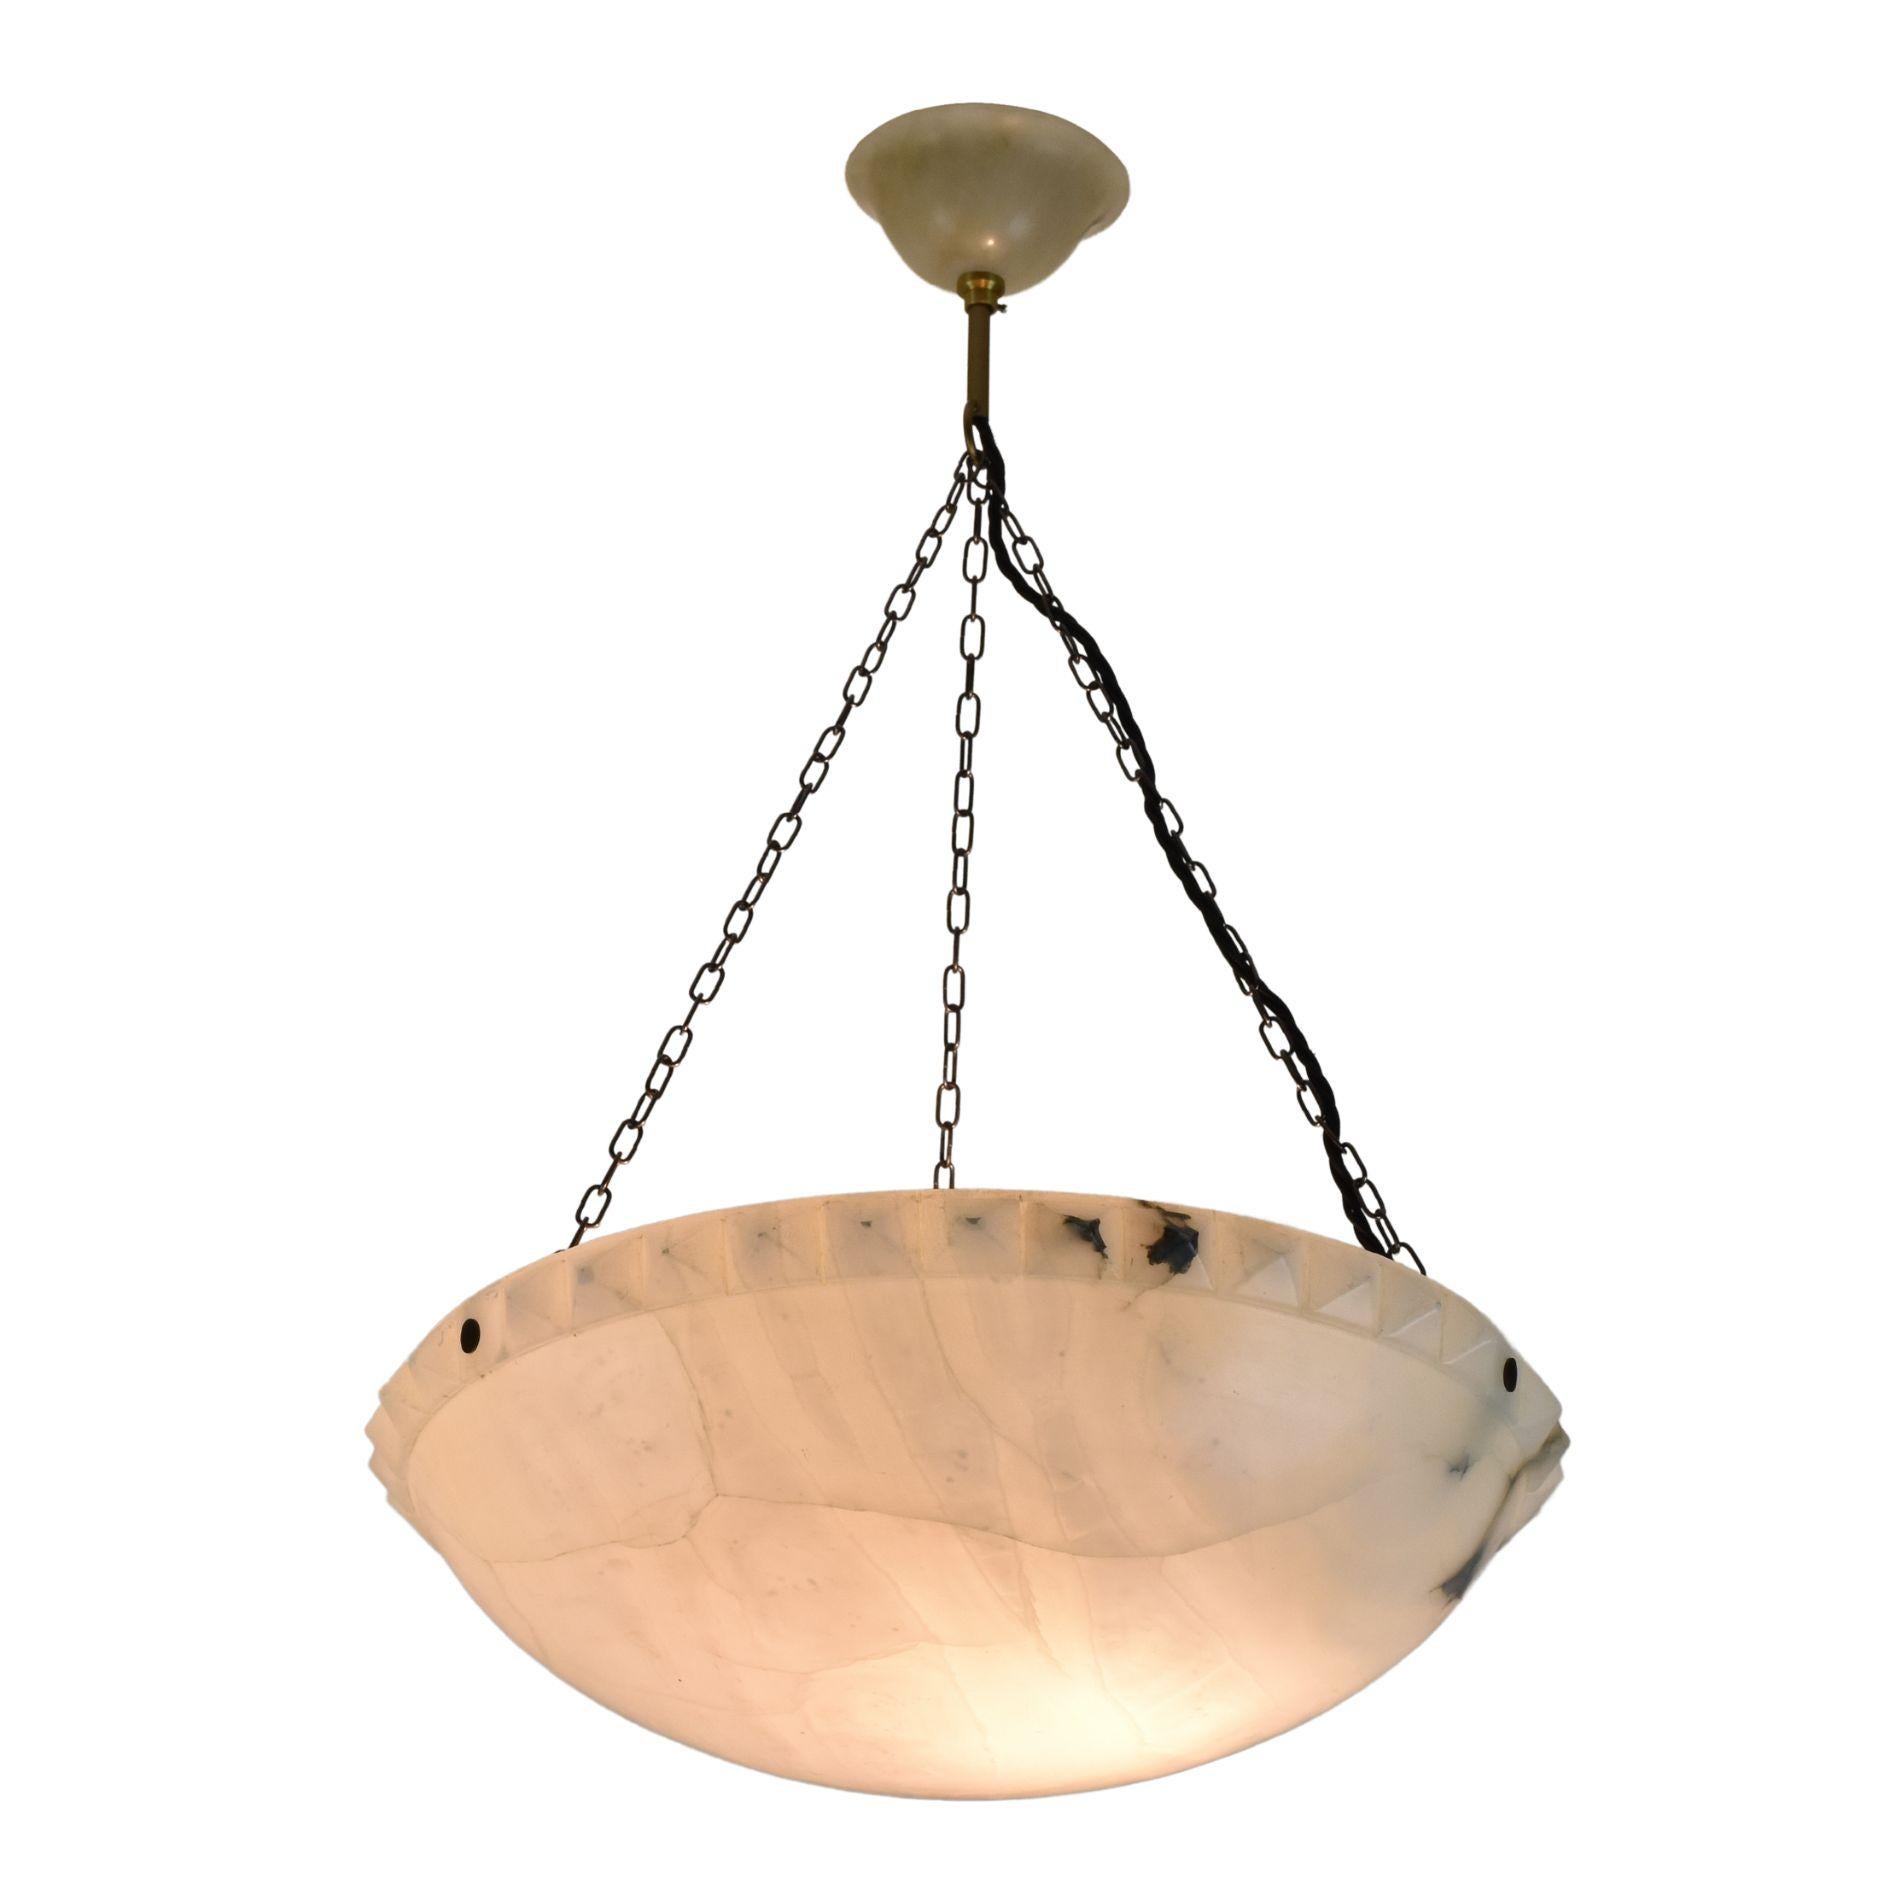 A large elegant French Art Deco alabaster ceiling lamp featuring a carved hobnail-decorated rim with its original alabaster canopy.

This lamp is fitted with an E27 socket and has been newly rewired for the European market.

The original